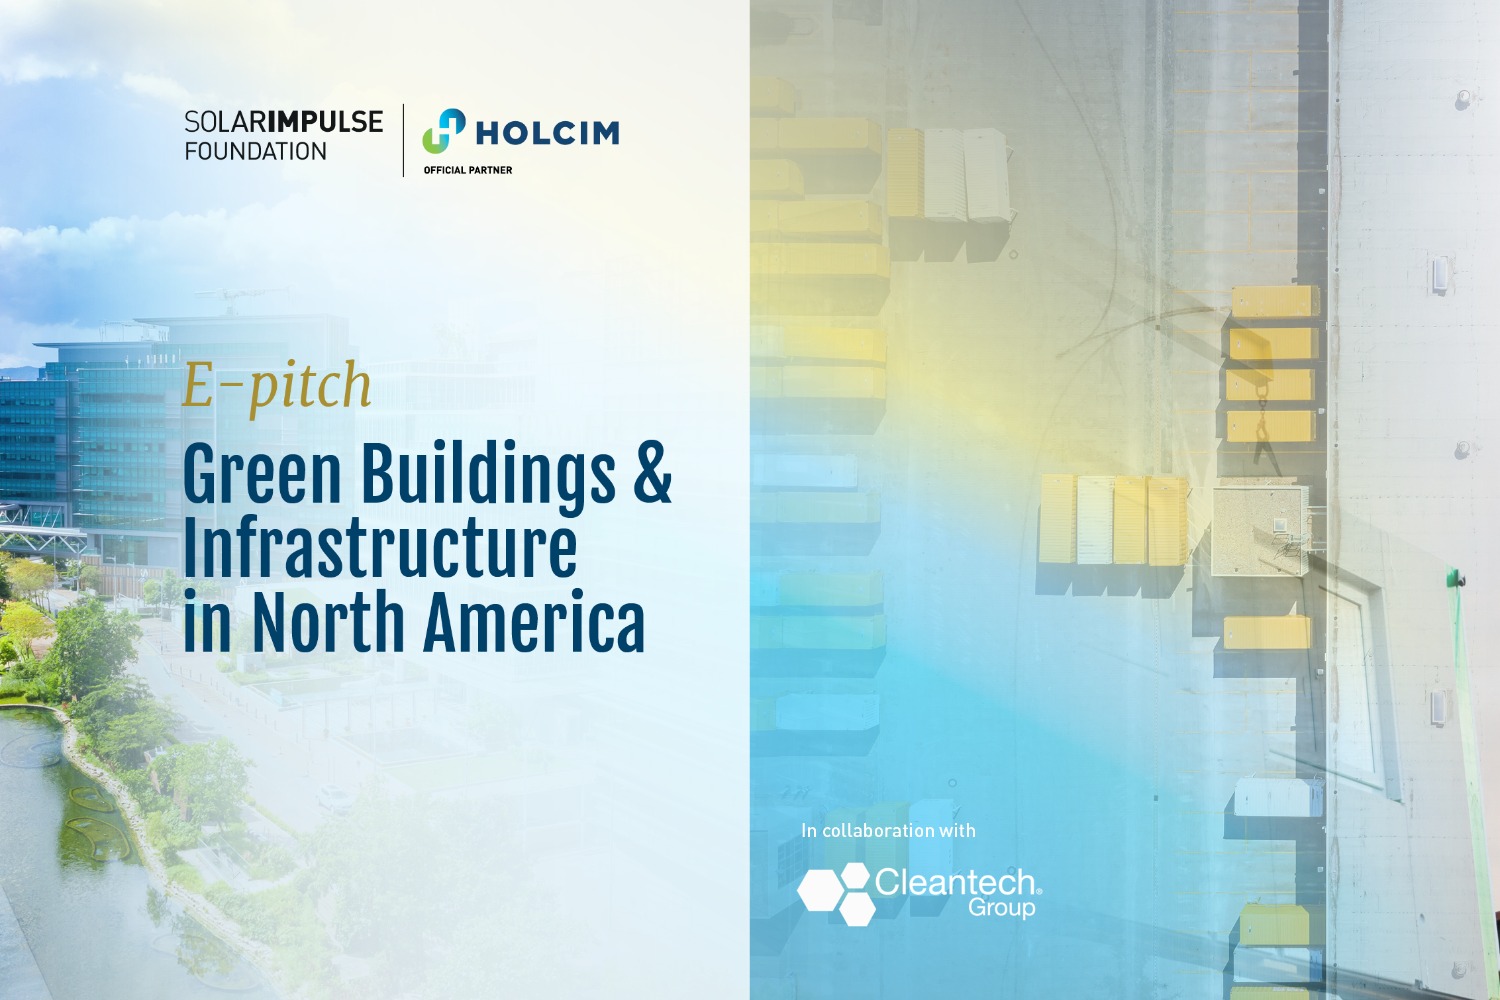 E-Pitch Solar Impulse Investment -"Green Buildings & Infrastructure in North America" - SIF x Cleantech Group